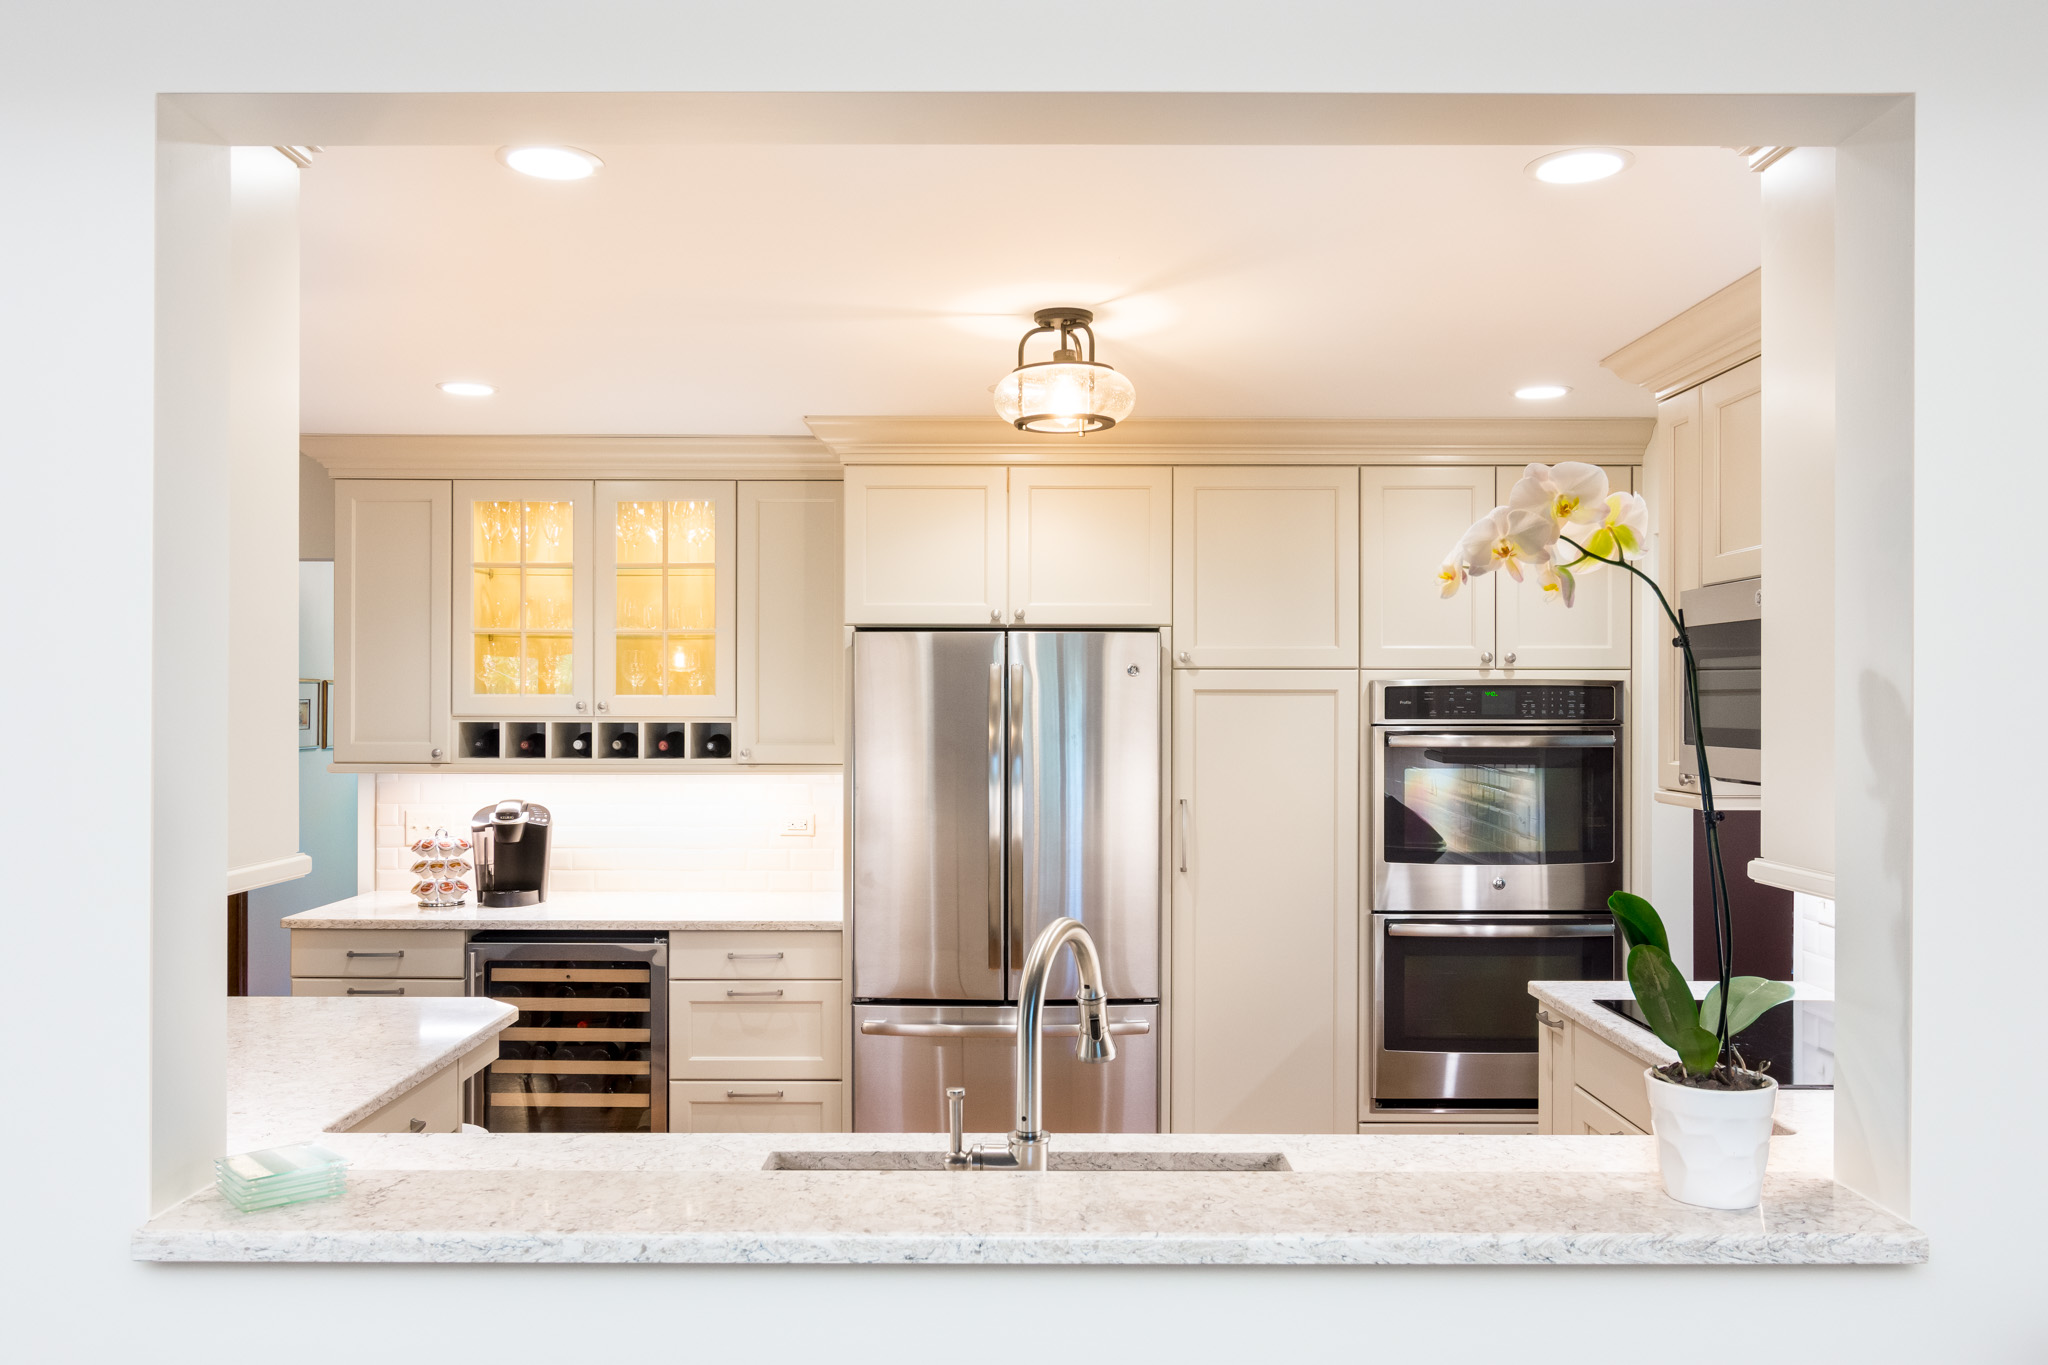 Home renovation: What's cooking in kitchen appliances